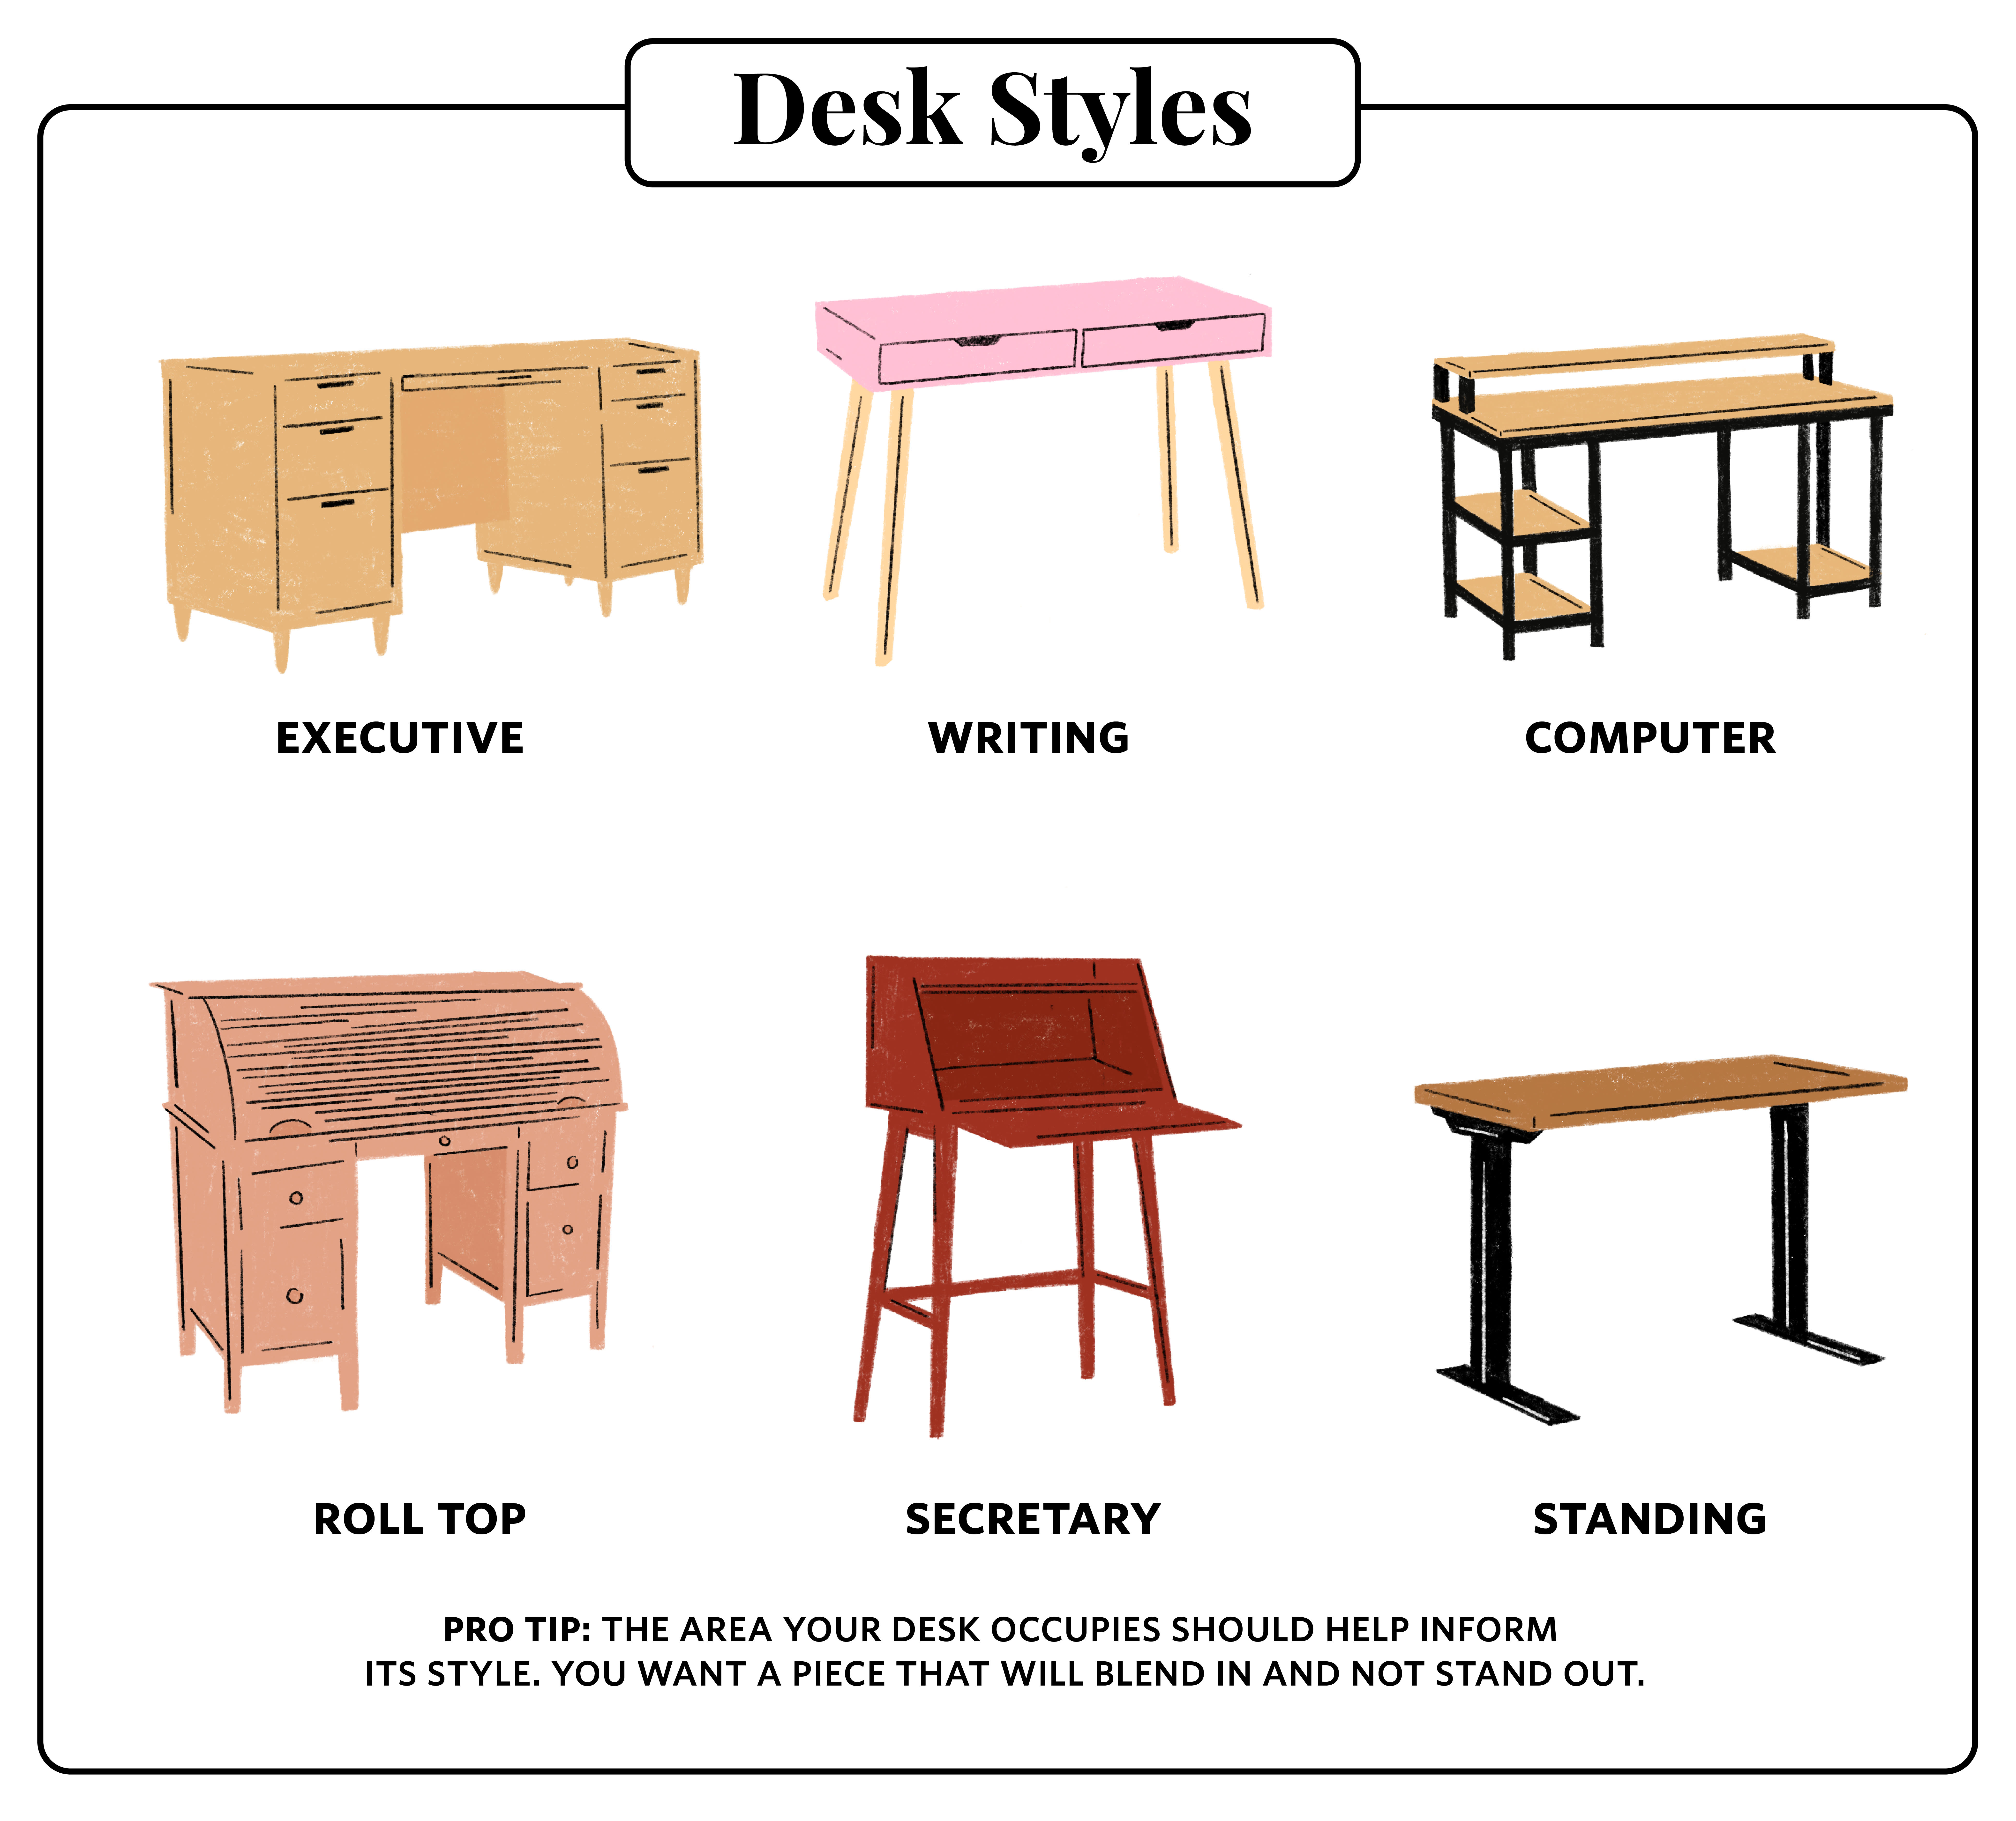 https://cdn.apartmenttherapy.info/image/upload/v1602082999/at/art/design/2020-10/home-office-buying-guide/home-office-buying-guide-desk-styles.jpg